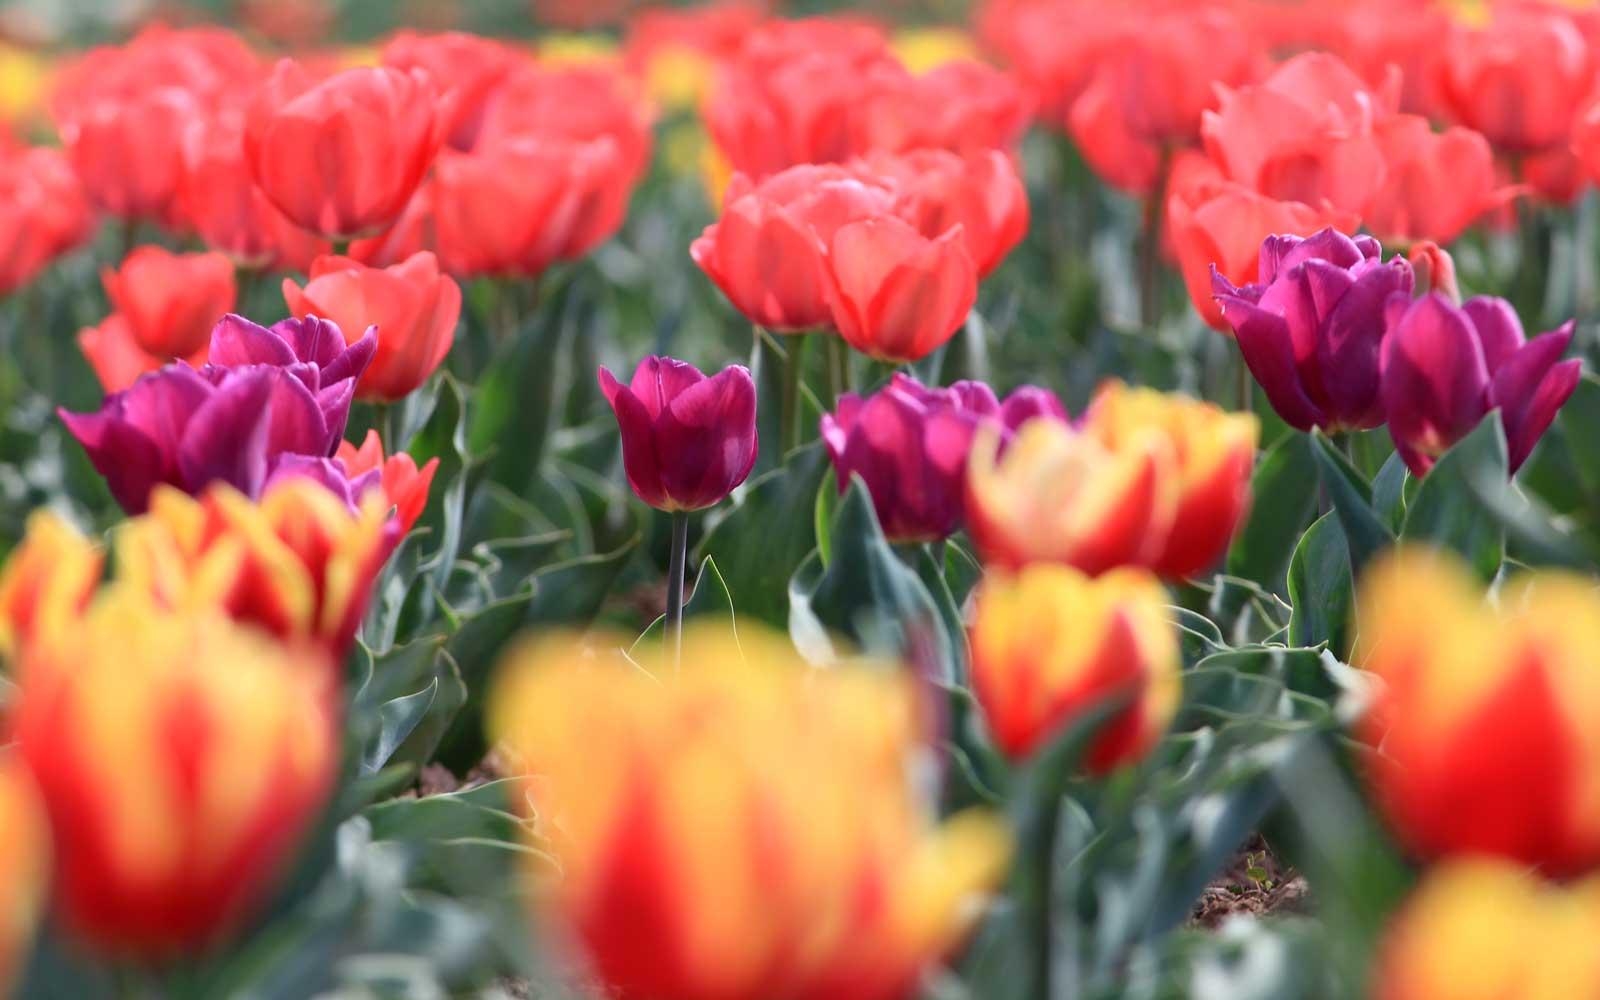 Asia's Largest Tulip Garden Is in Full Bloom and You Need to See the Colors. Travel + Leisure